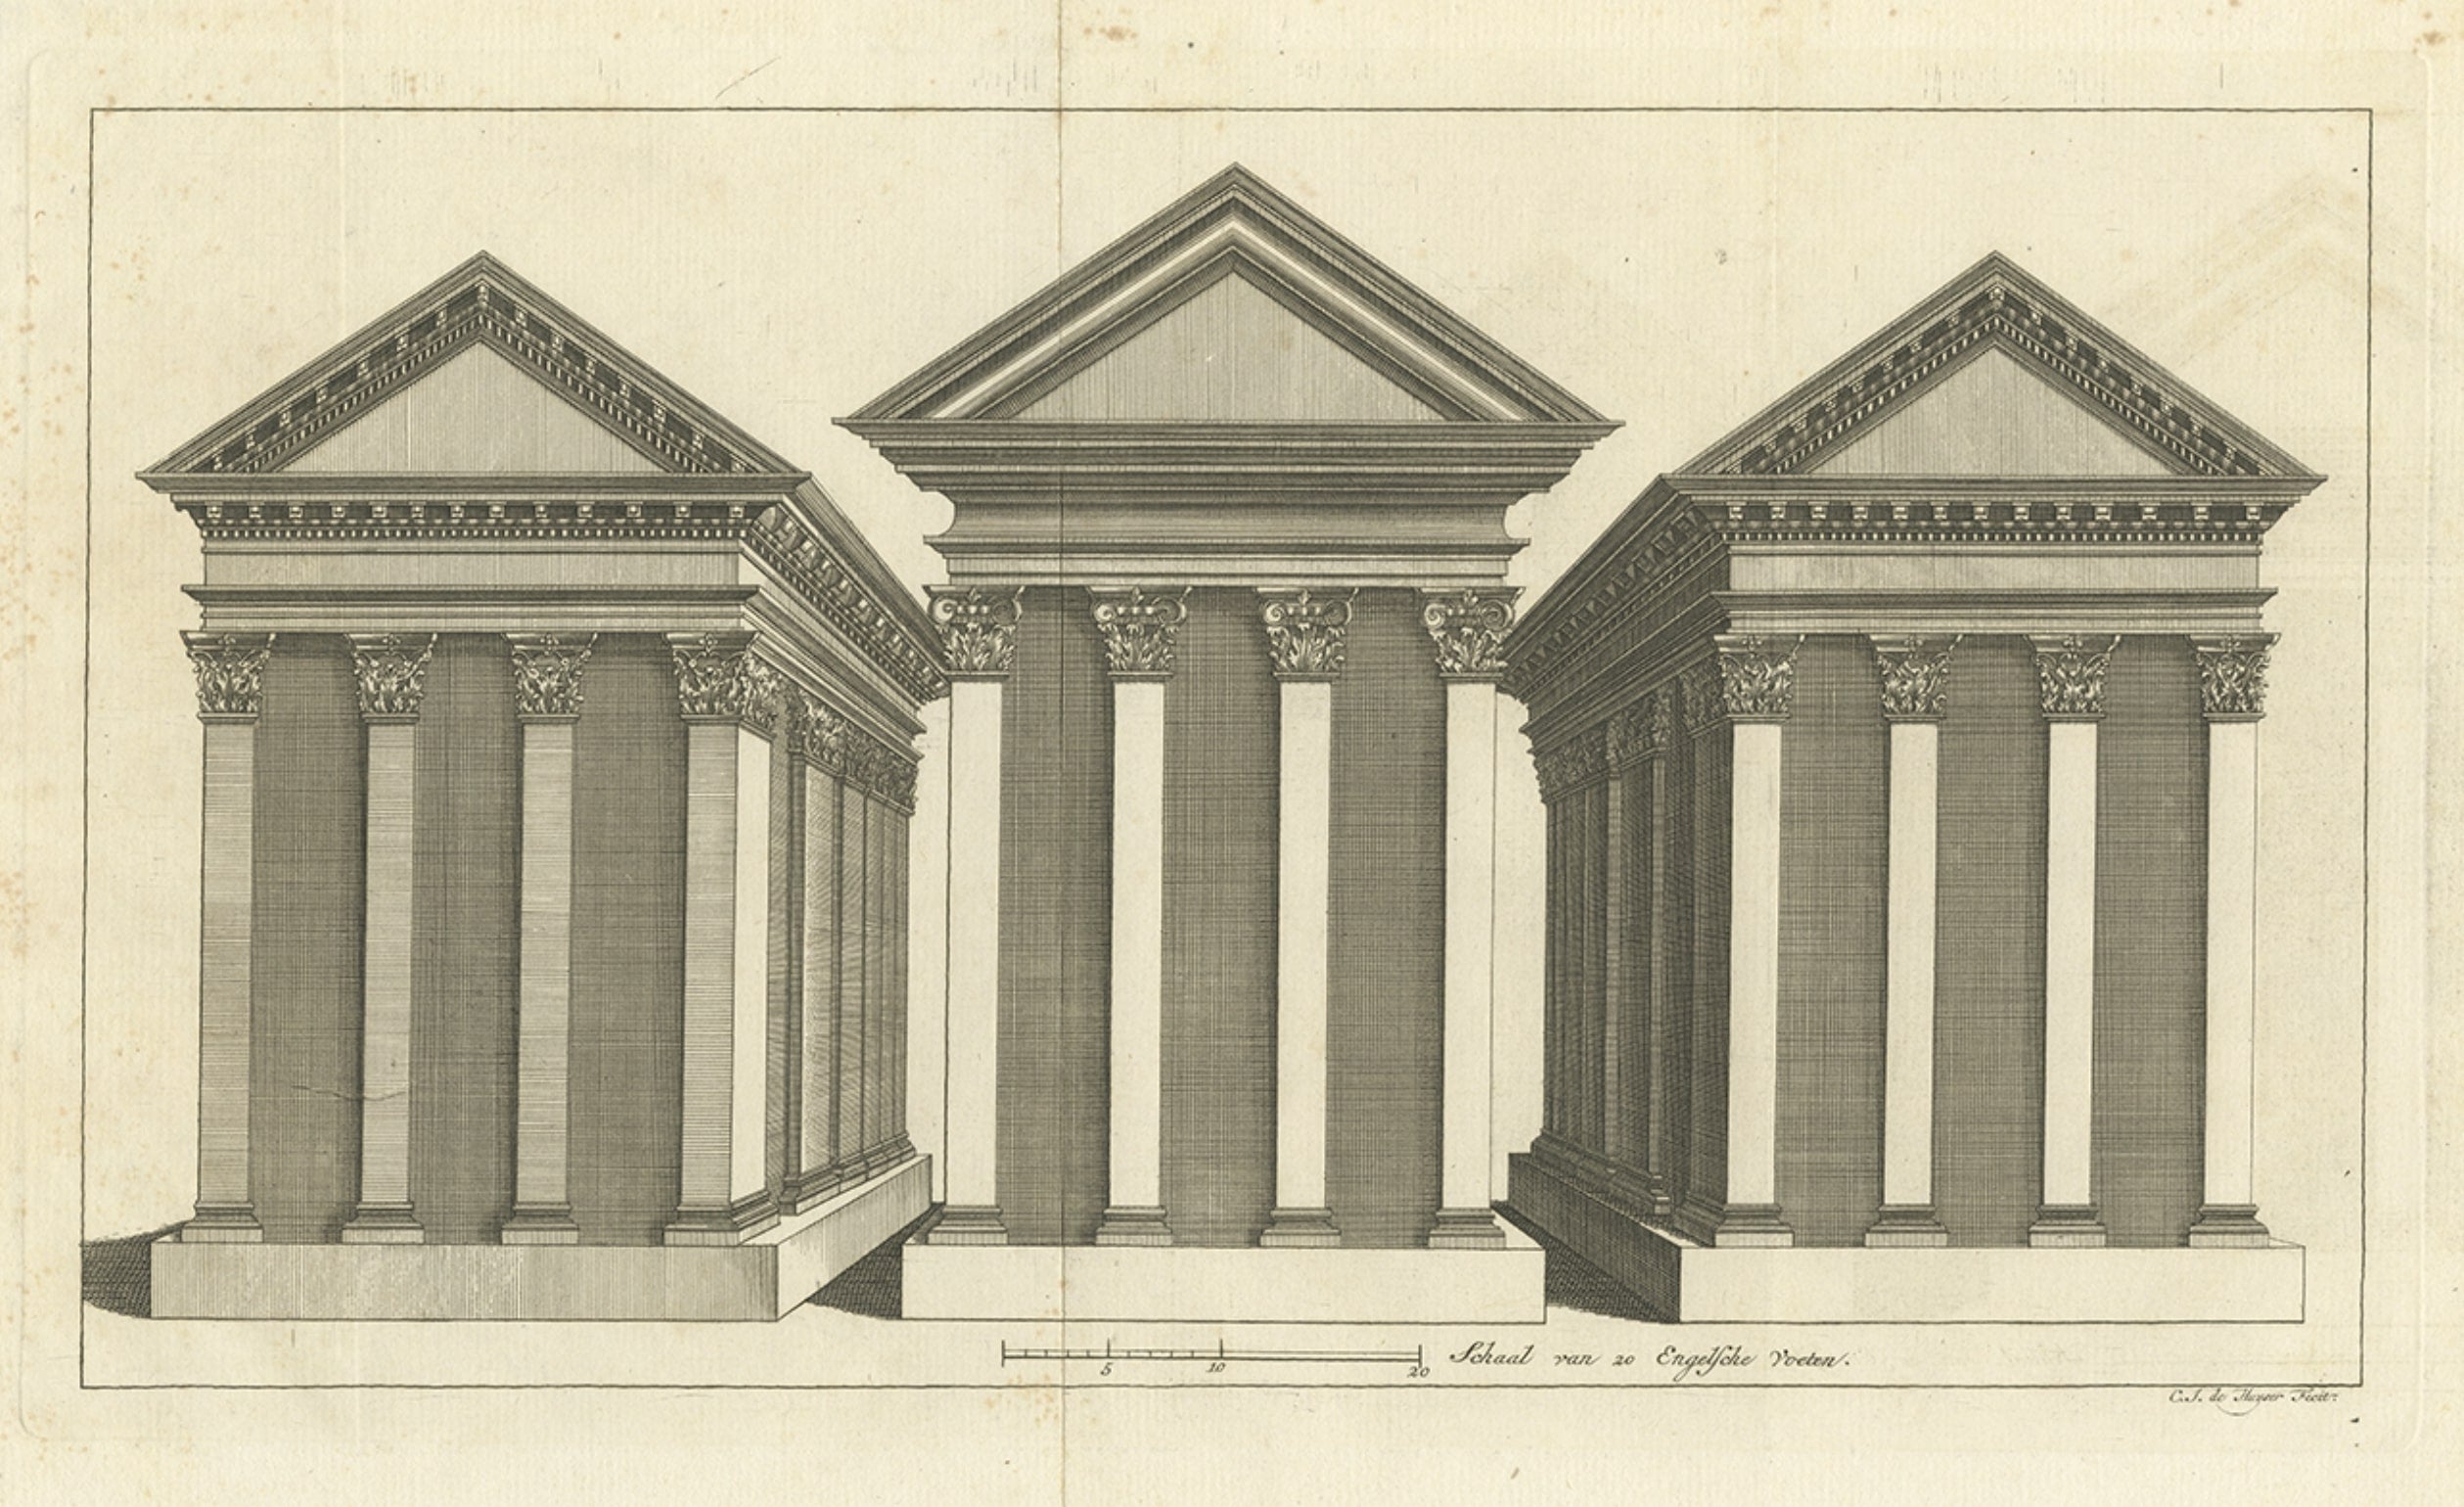 Antique Print of Three Temples by Shaw, 1773